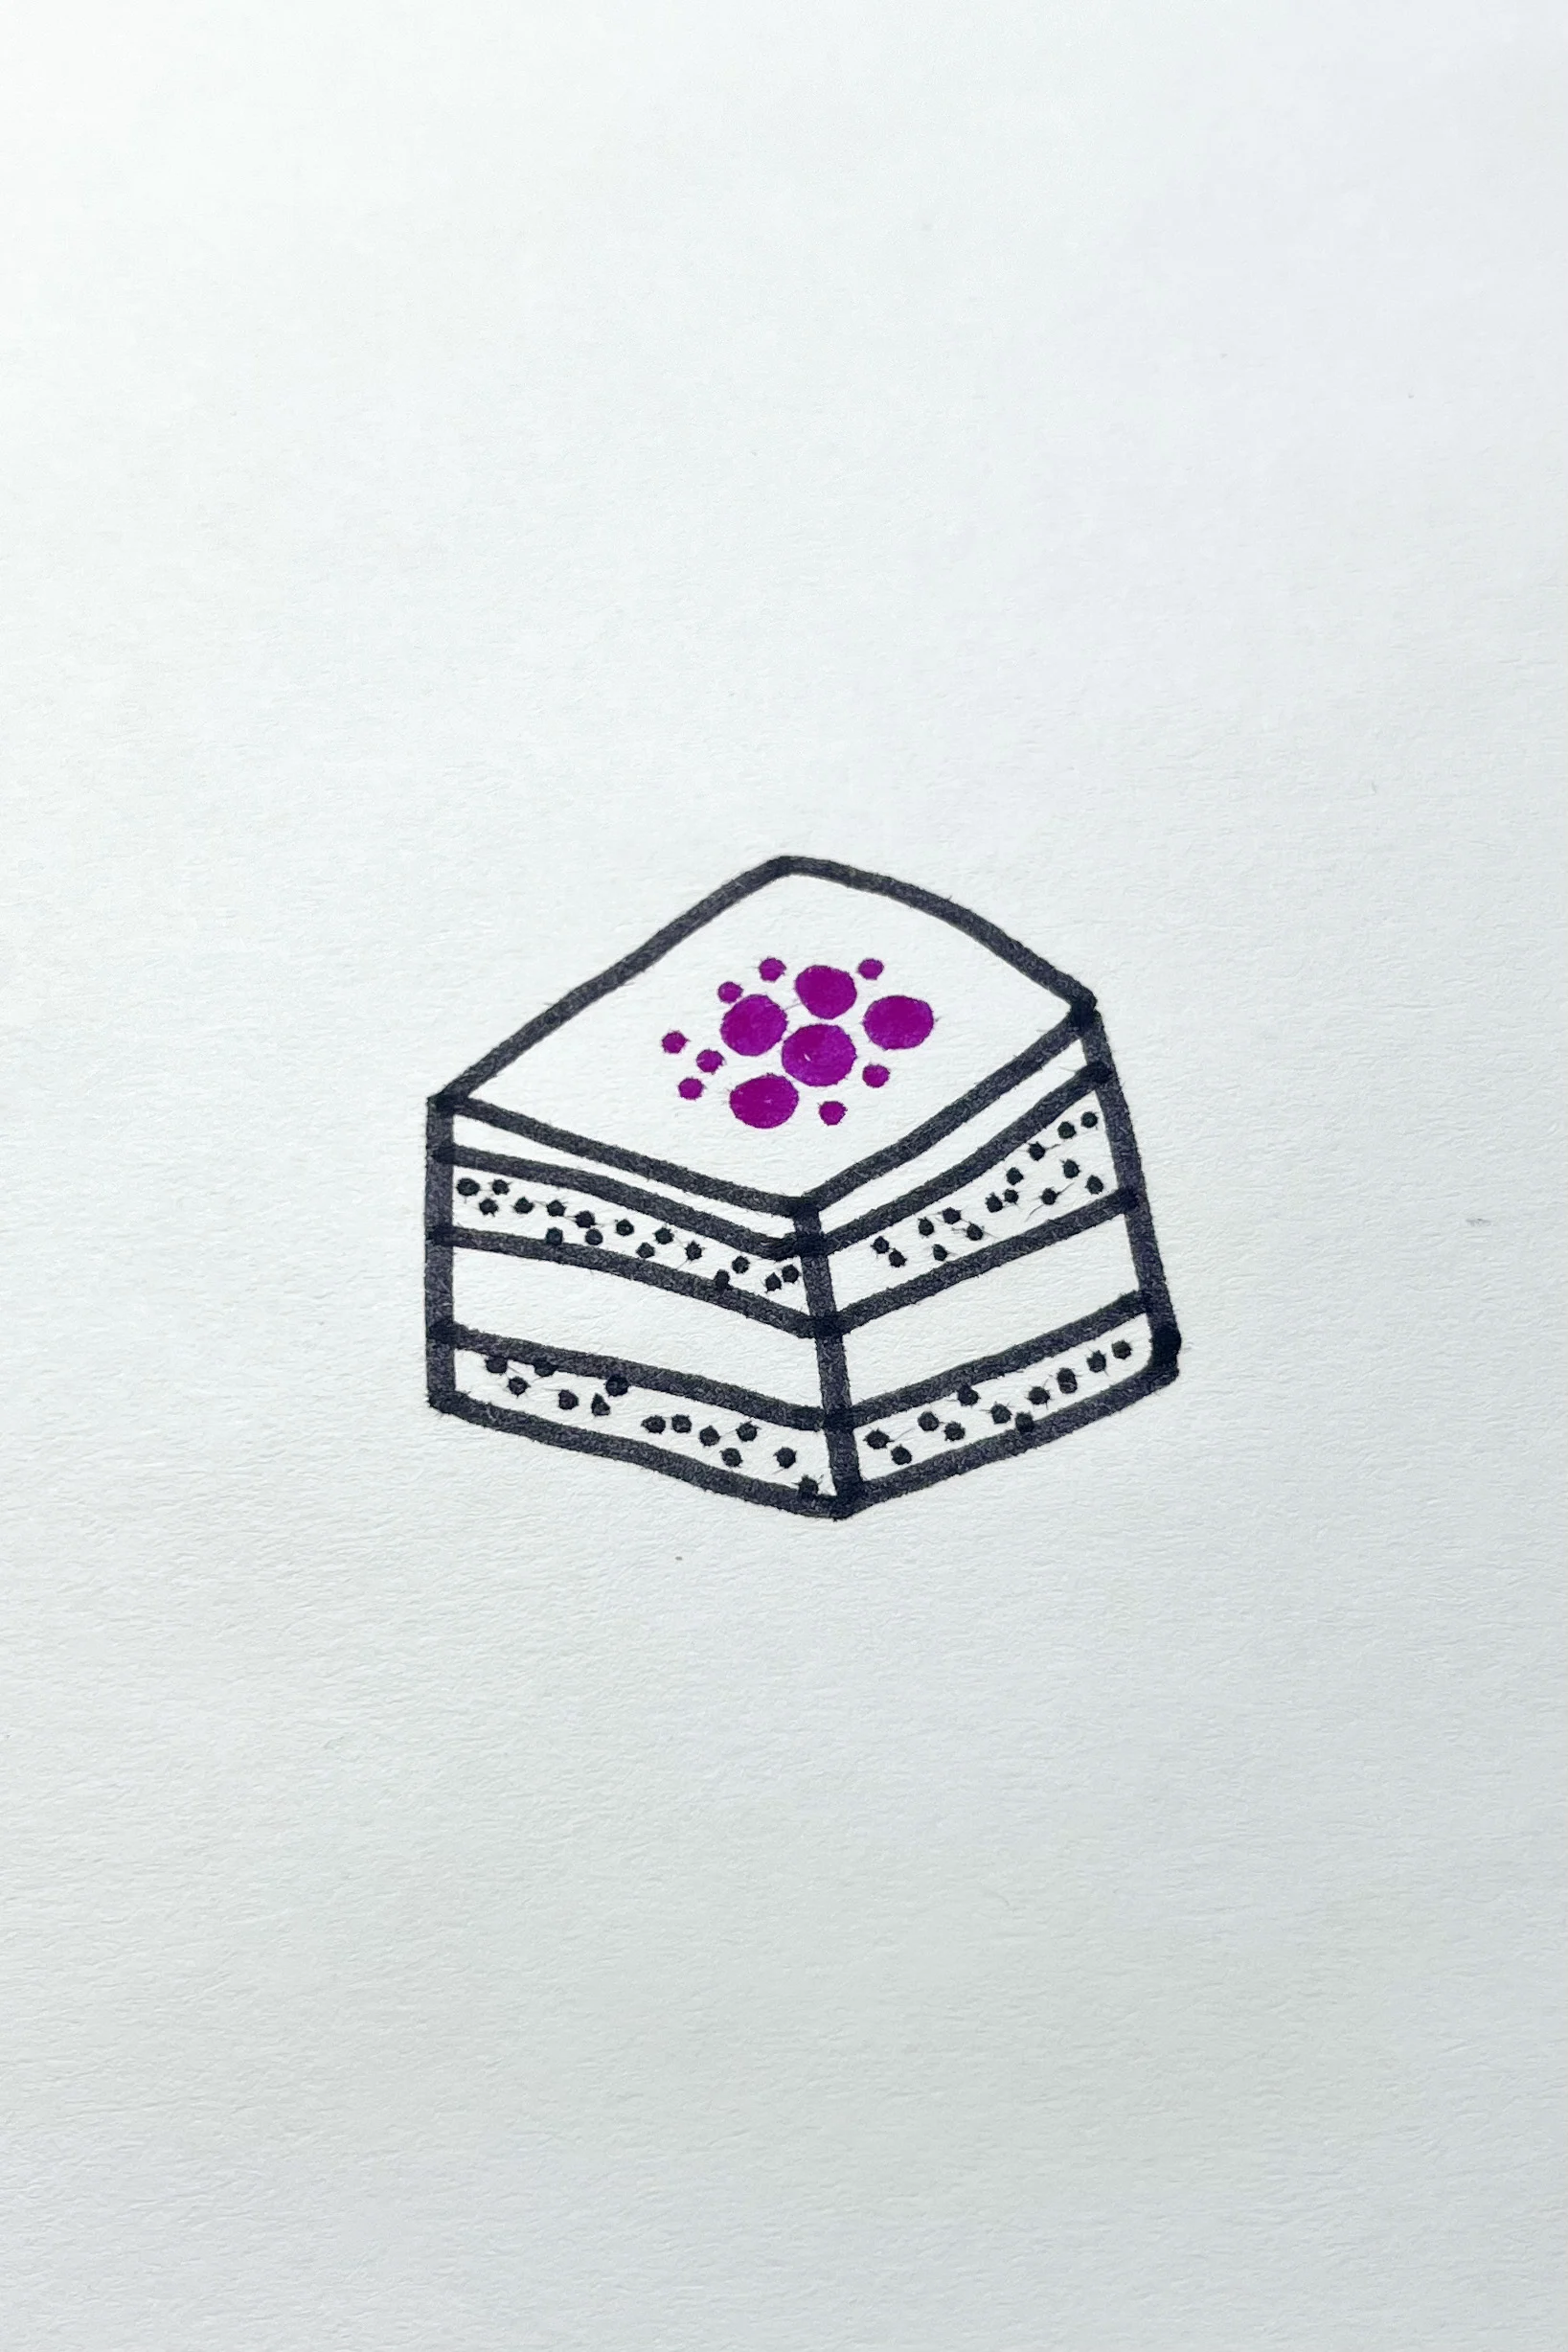 berry tartlet drawing